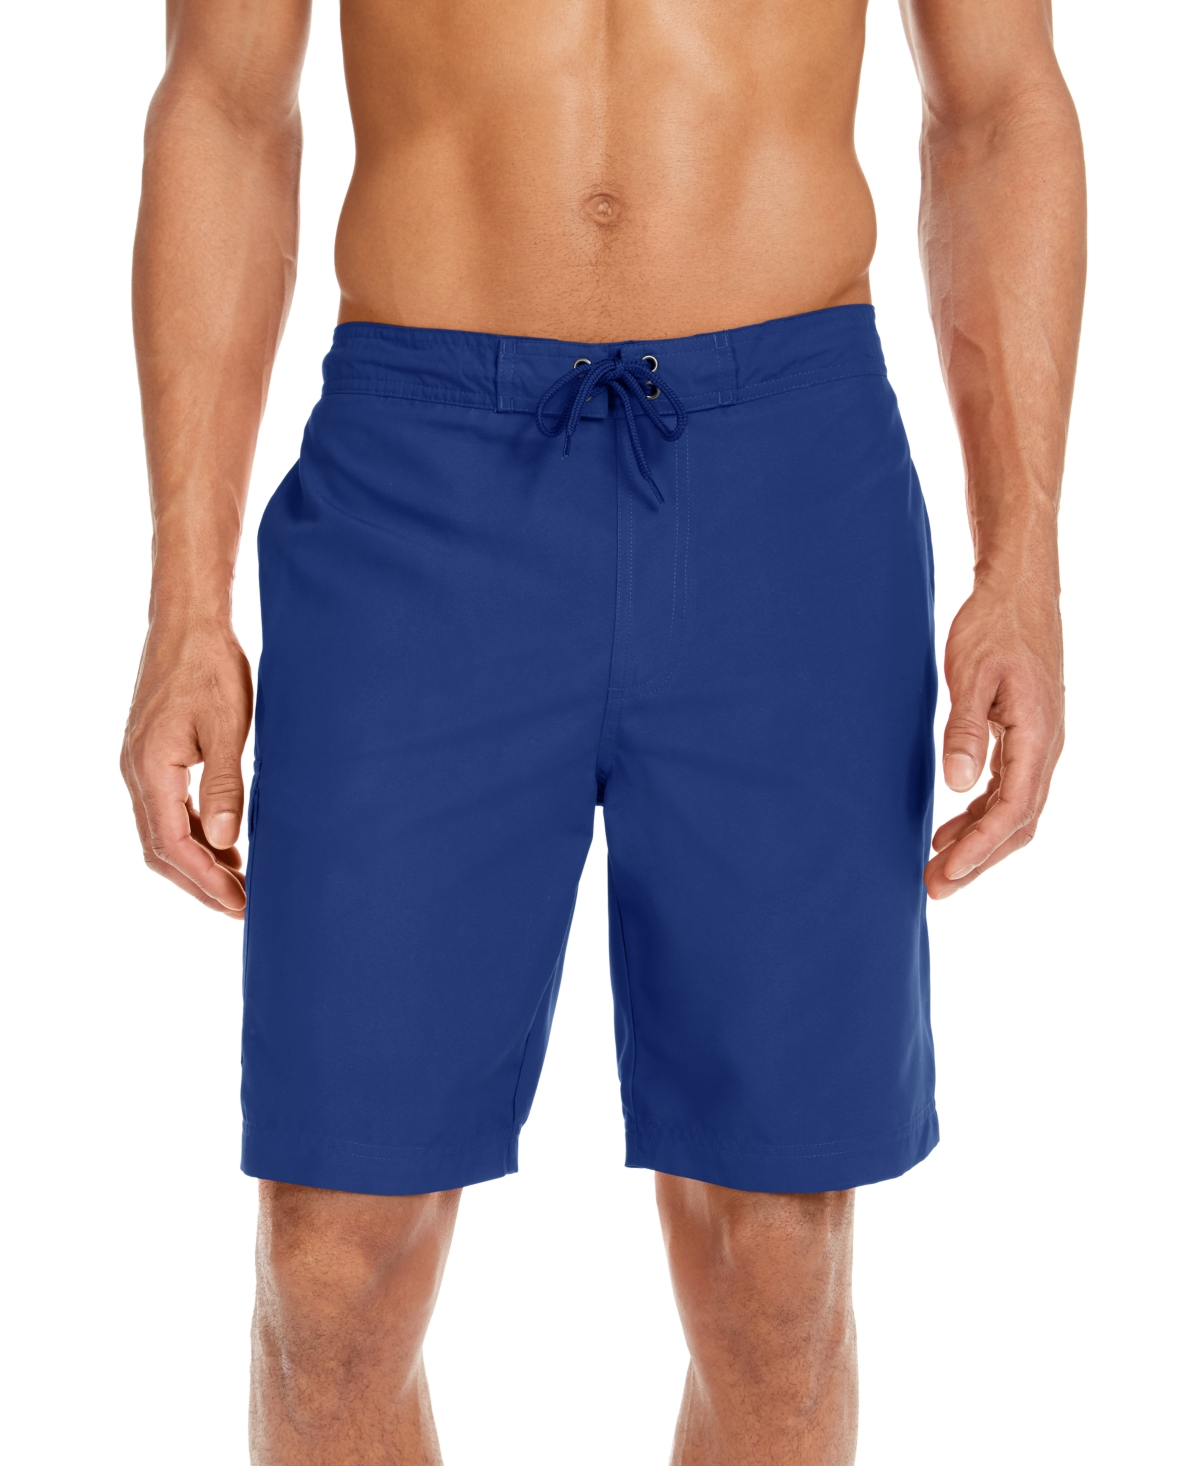 Men's Solid Quick-Dry 9" E-Board Shorts, Created for Macy's - Fire